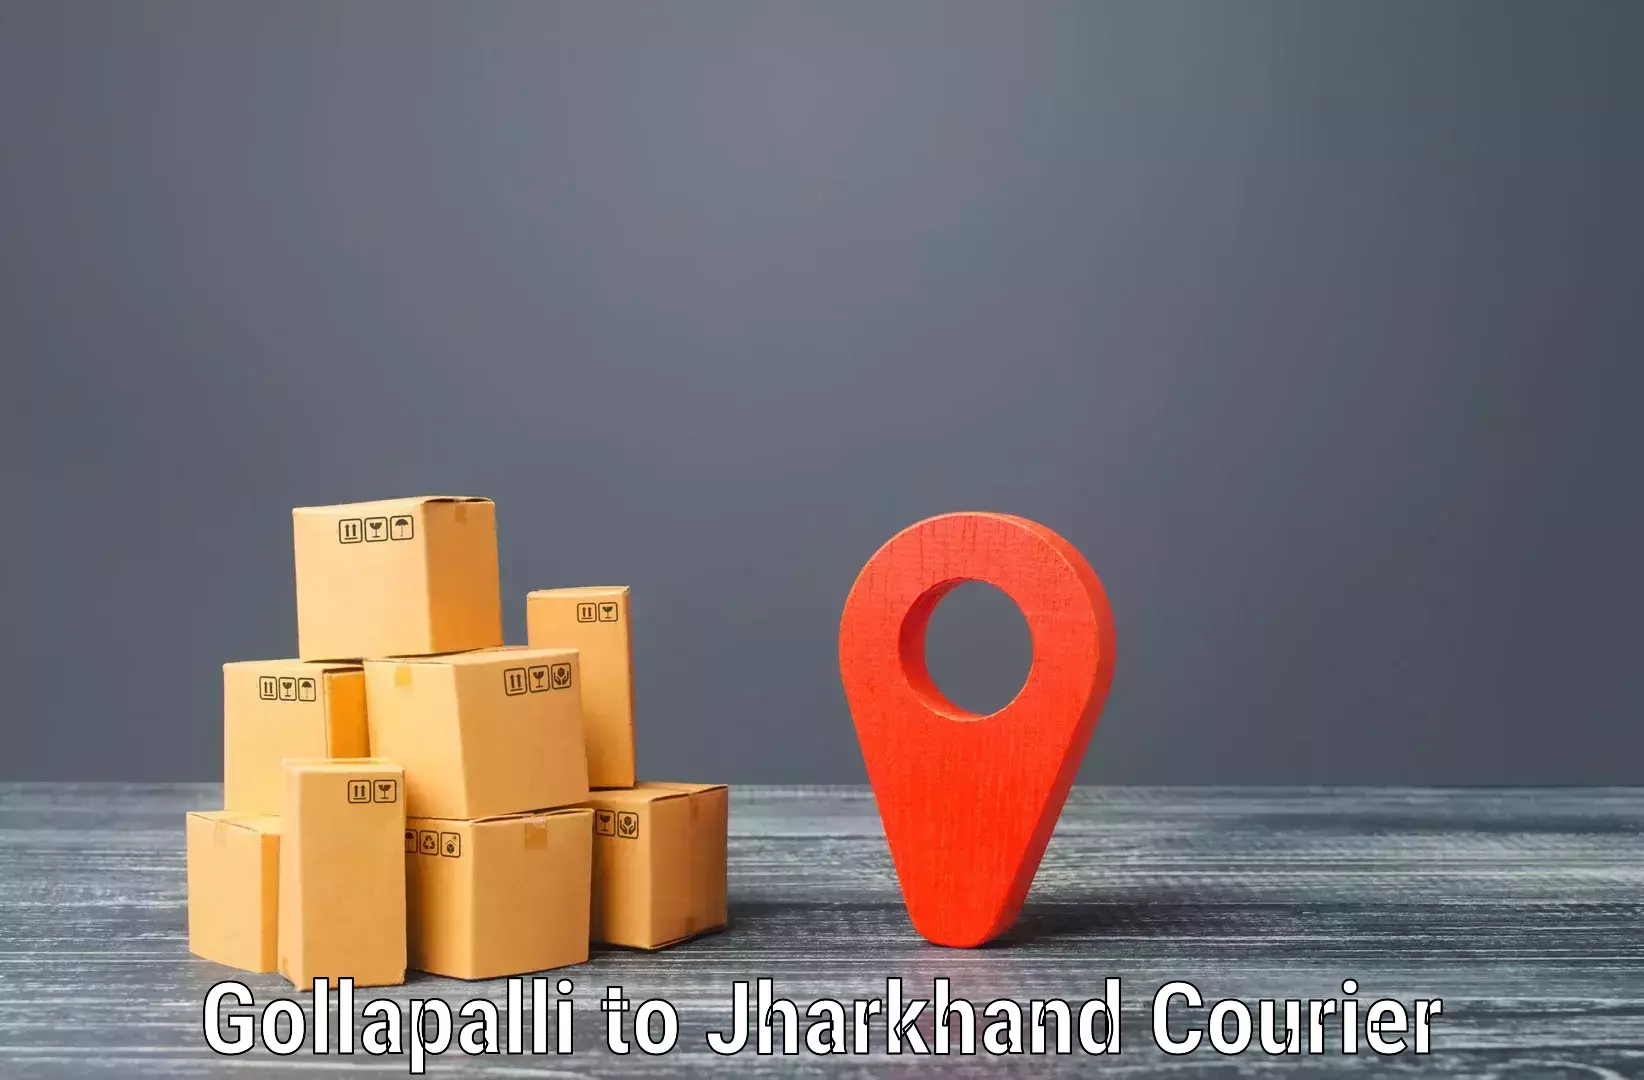 Sustainable shipping practices in Gollapalli to Medininagar